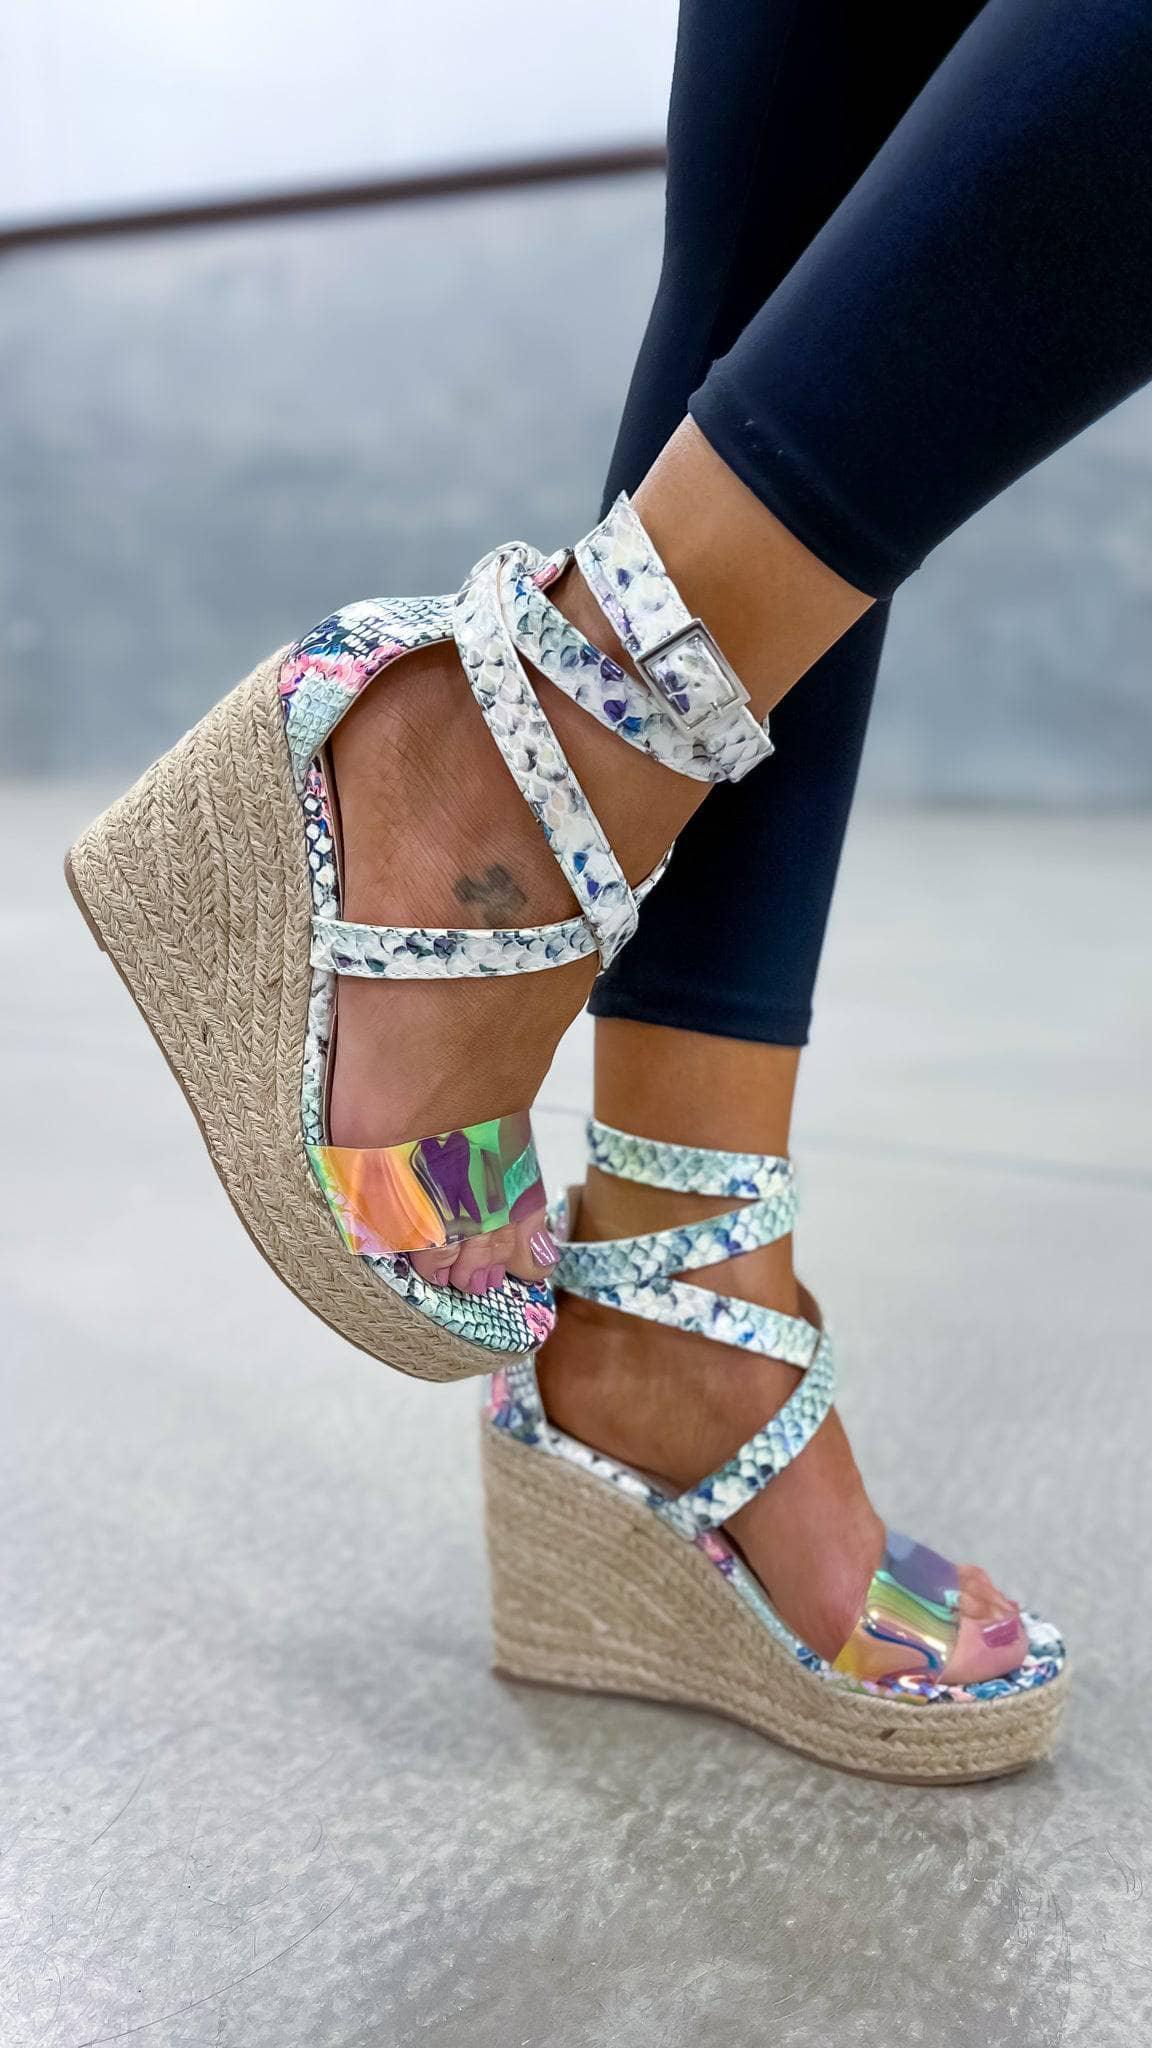 Just A Glimmer Wedges - The ZigZag Stripe